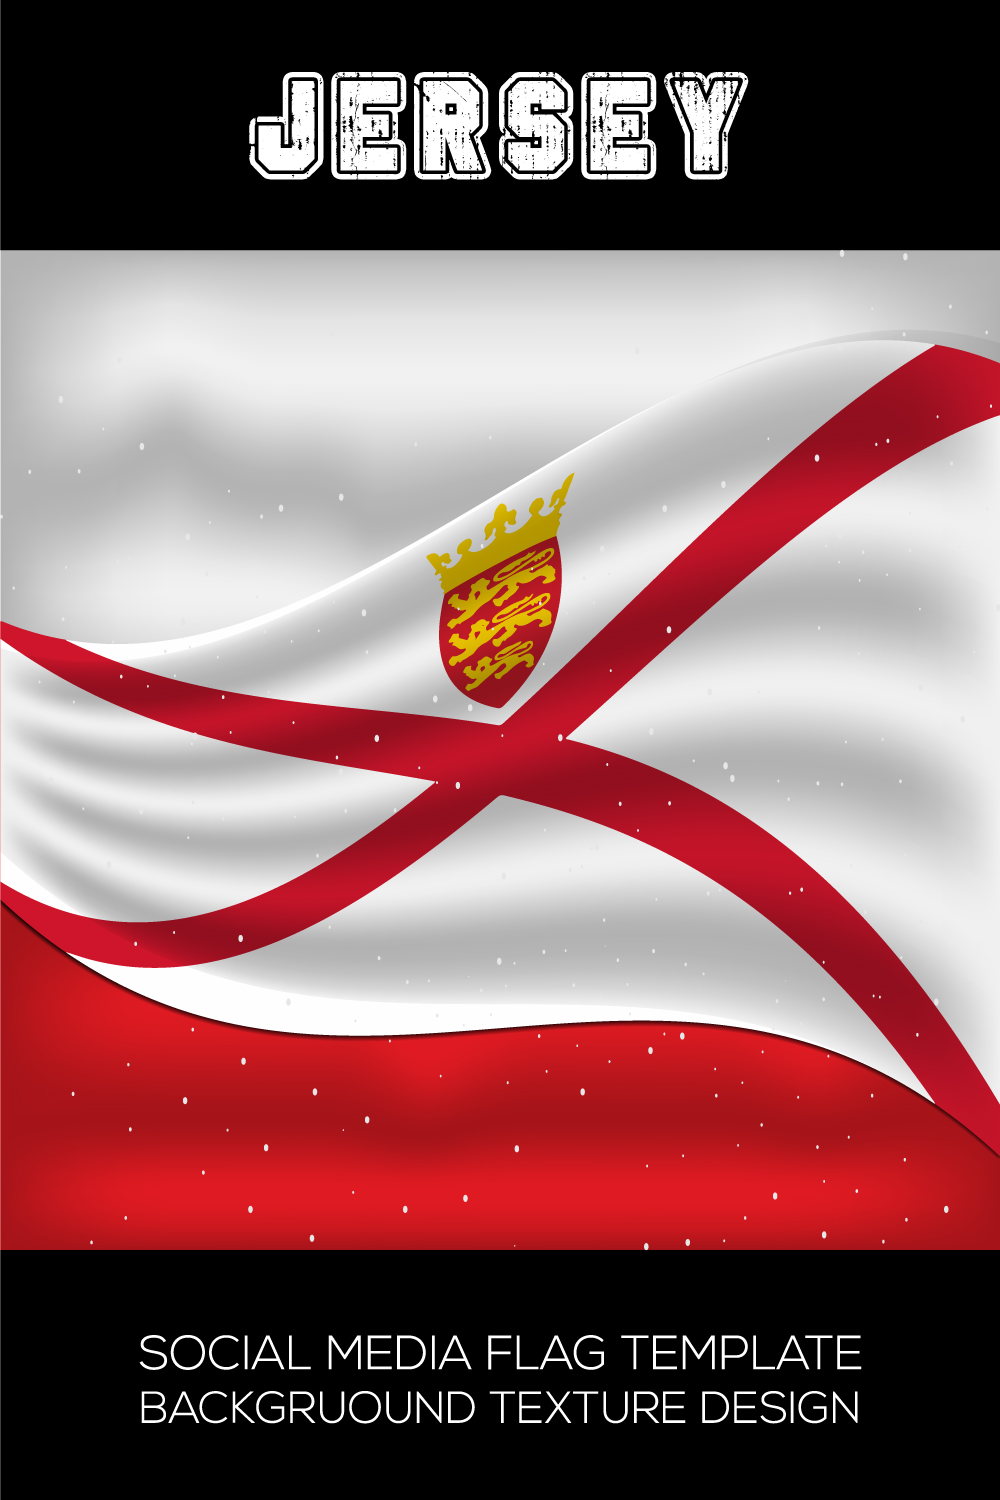 Exquisite image of the flag of Jersey.